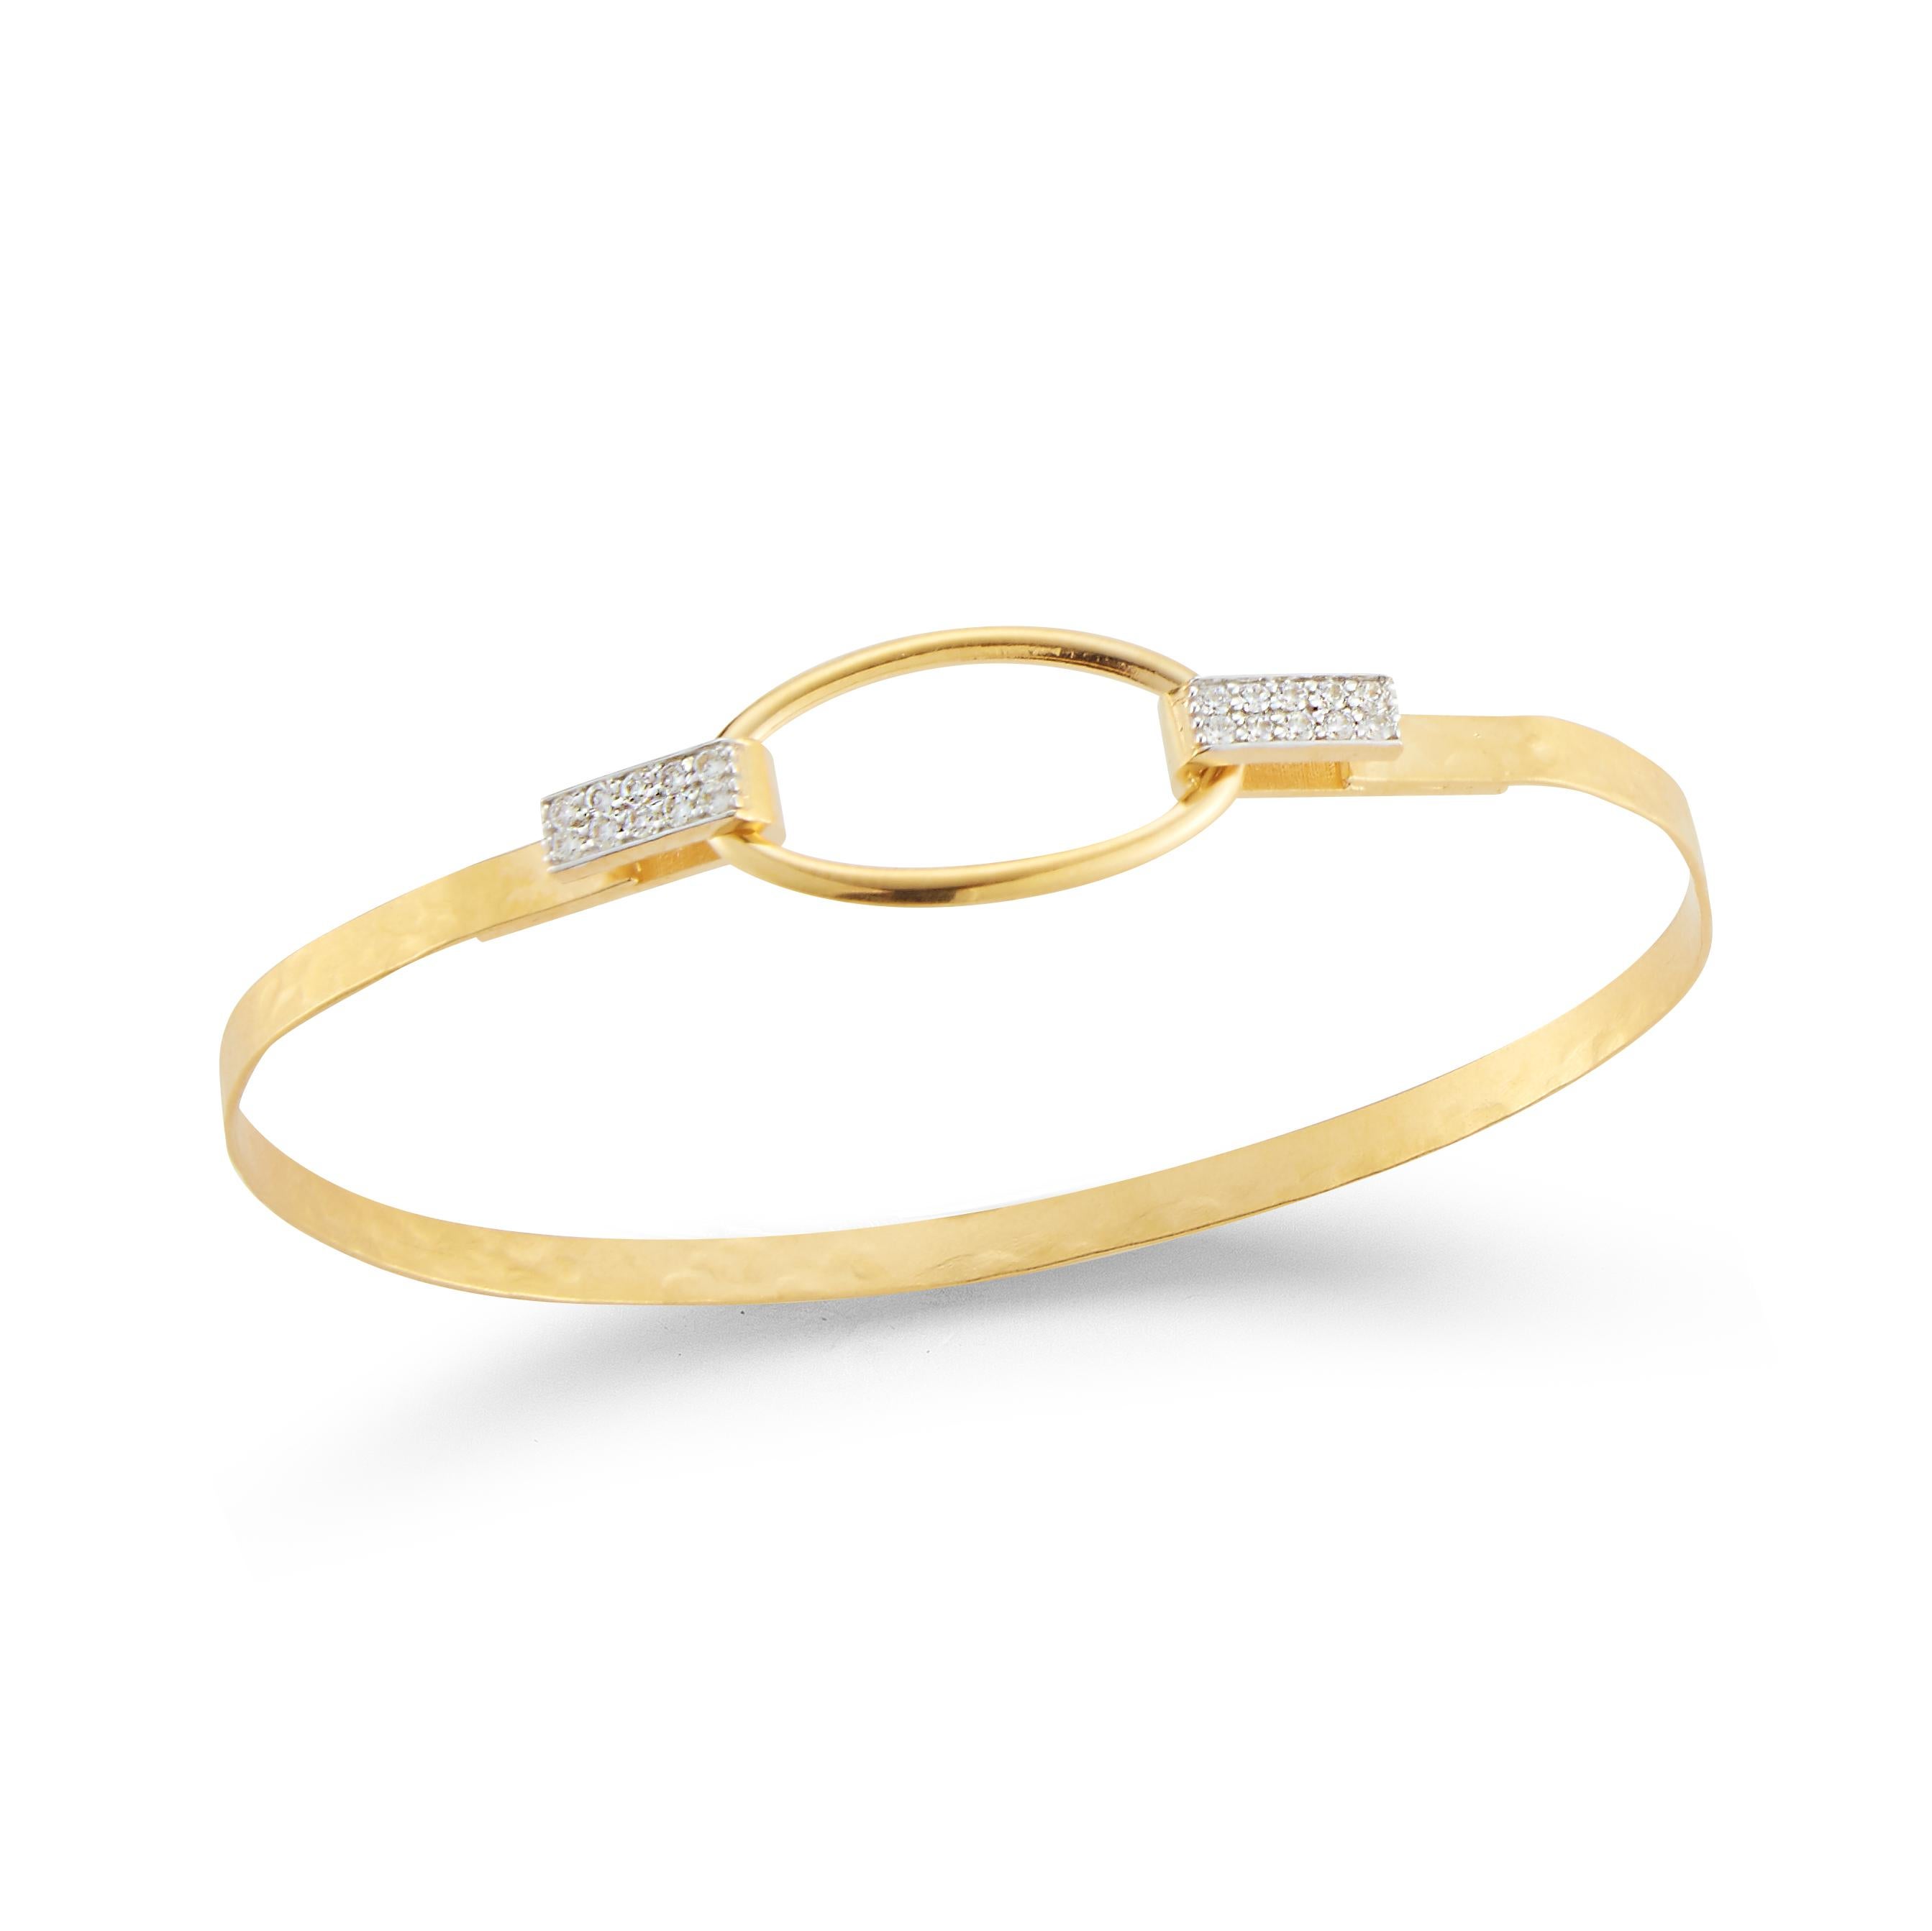 14 Karat Yellow Gold Hand-Crafted 4mm Mixed Hammer and Polish-Finished Open Oval Bangle Bracelet, Accented with 0.16 Carats of Pave Set Diamond Hinge Clasps.
